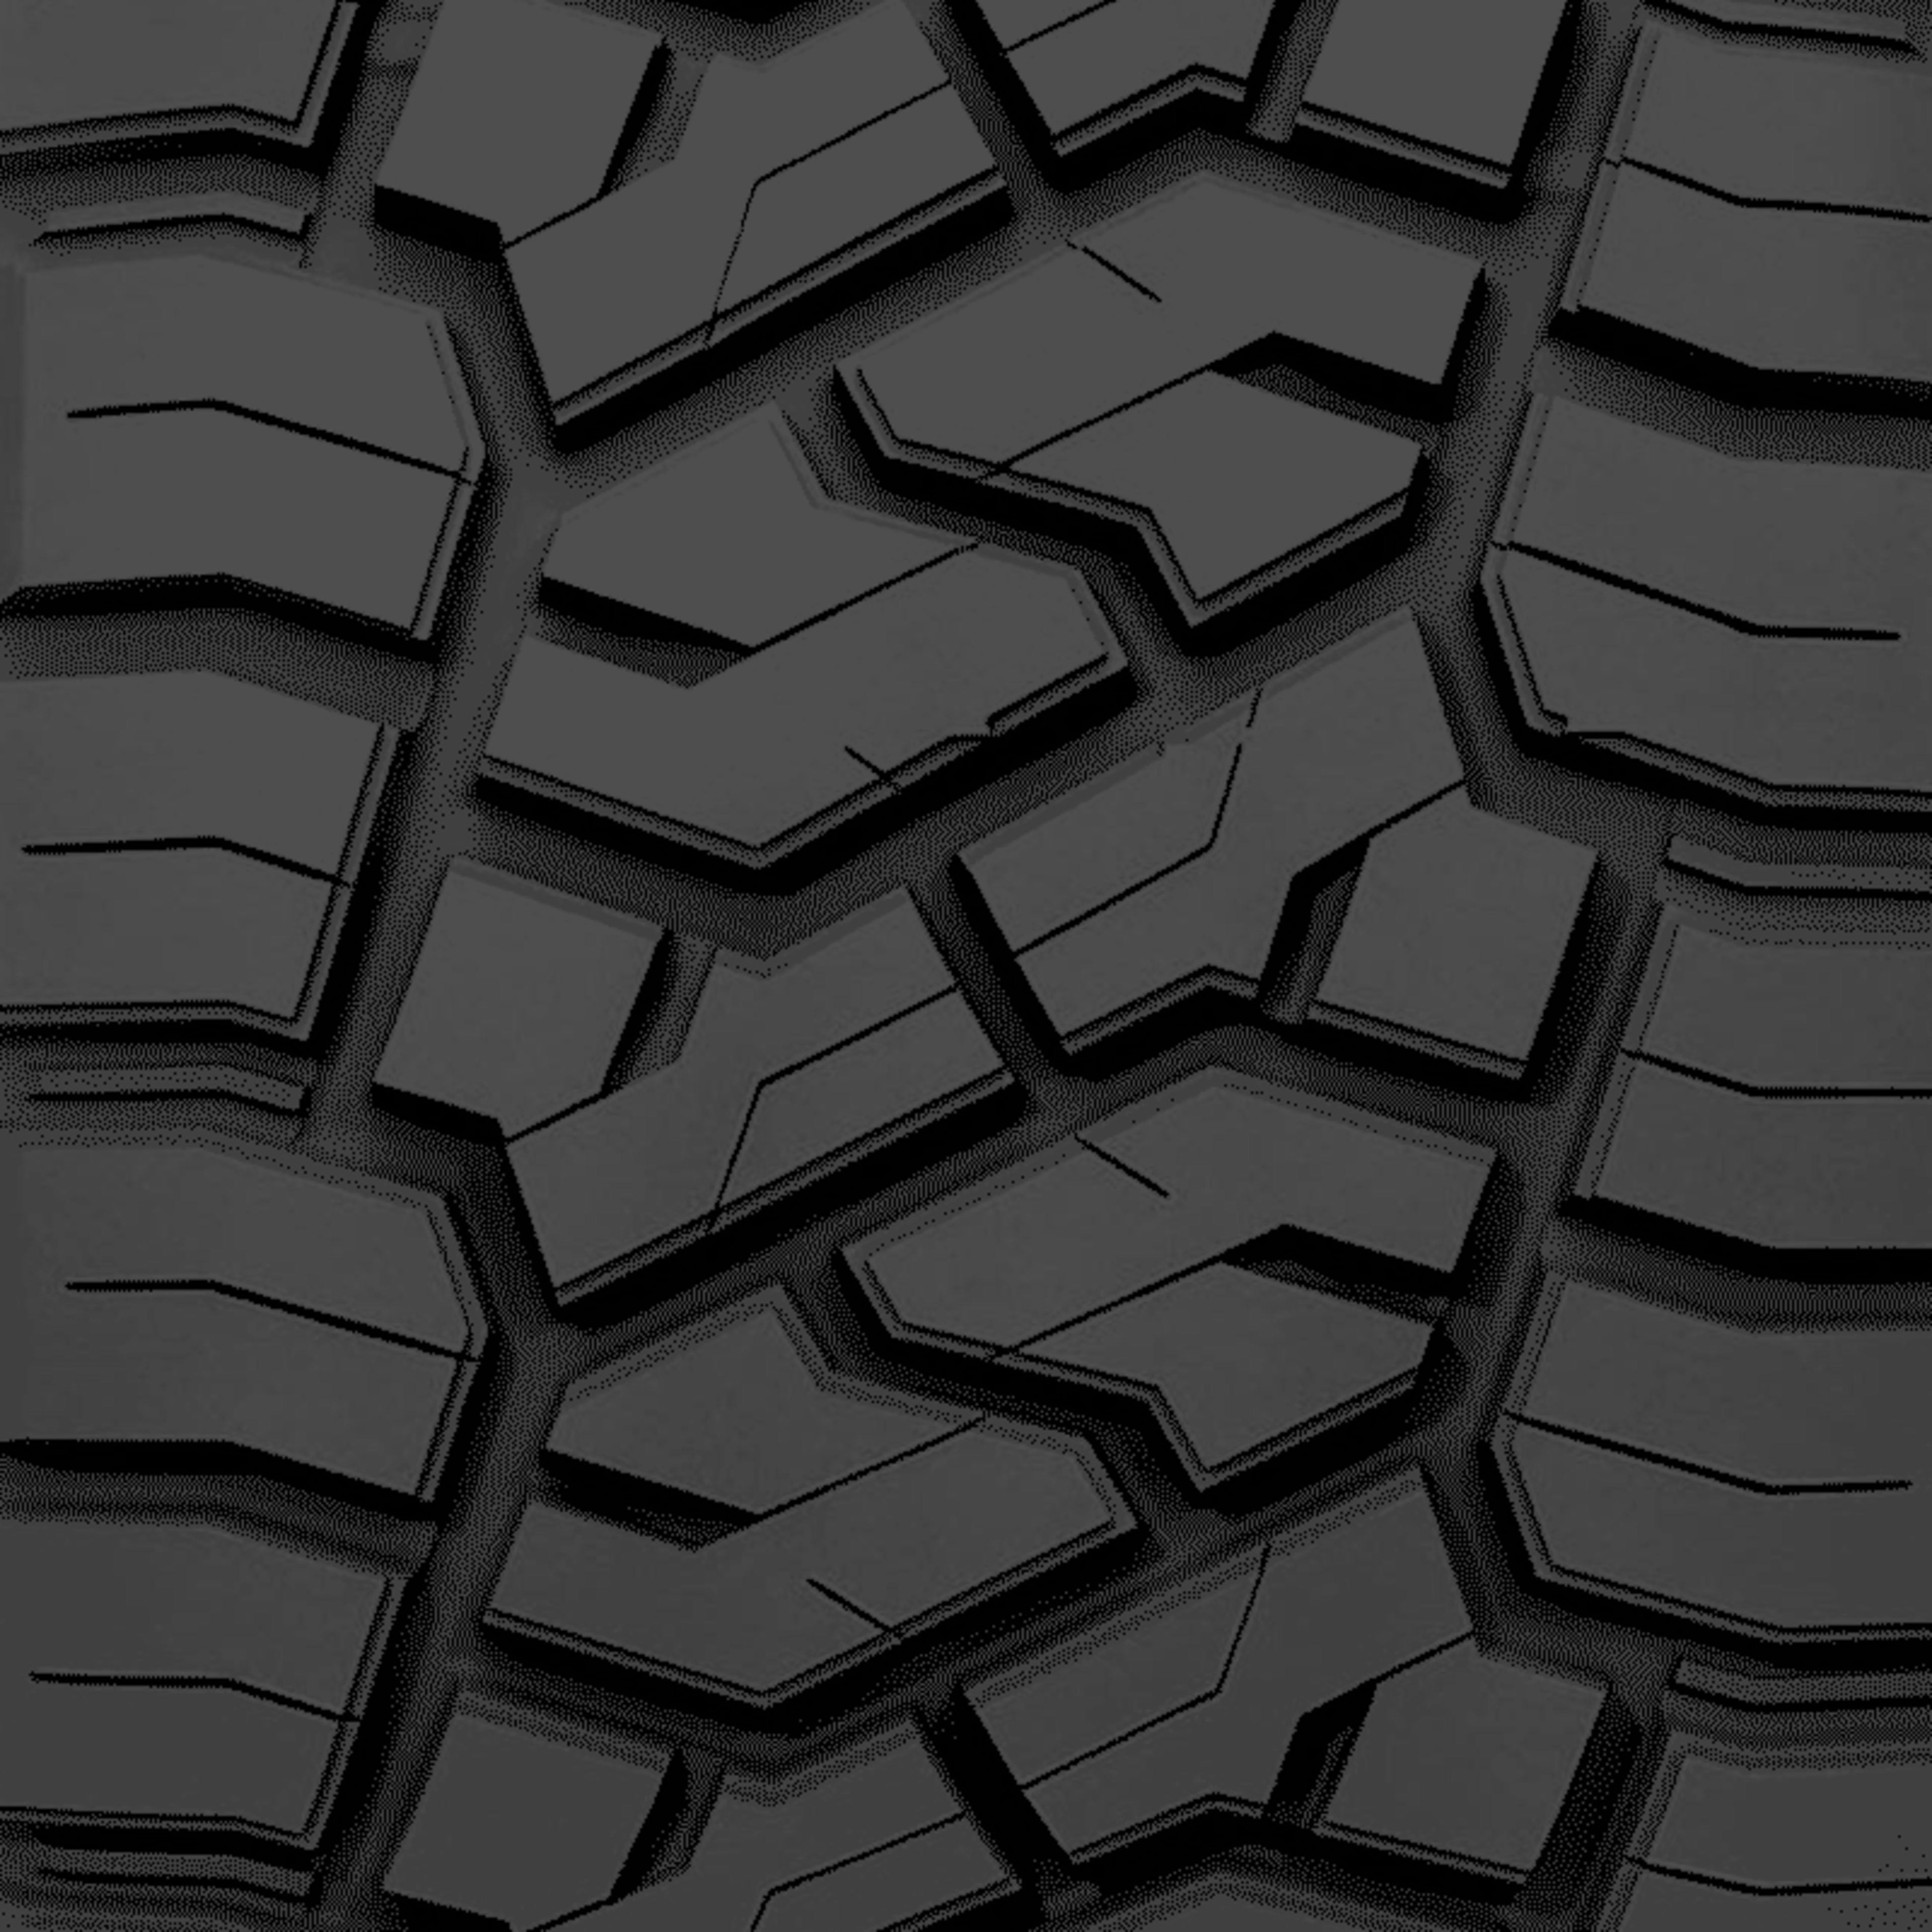 Toyo Tires Open Country R/T Trail Tire